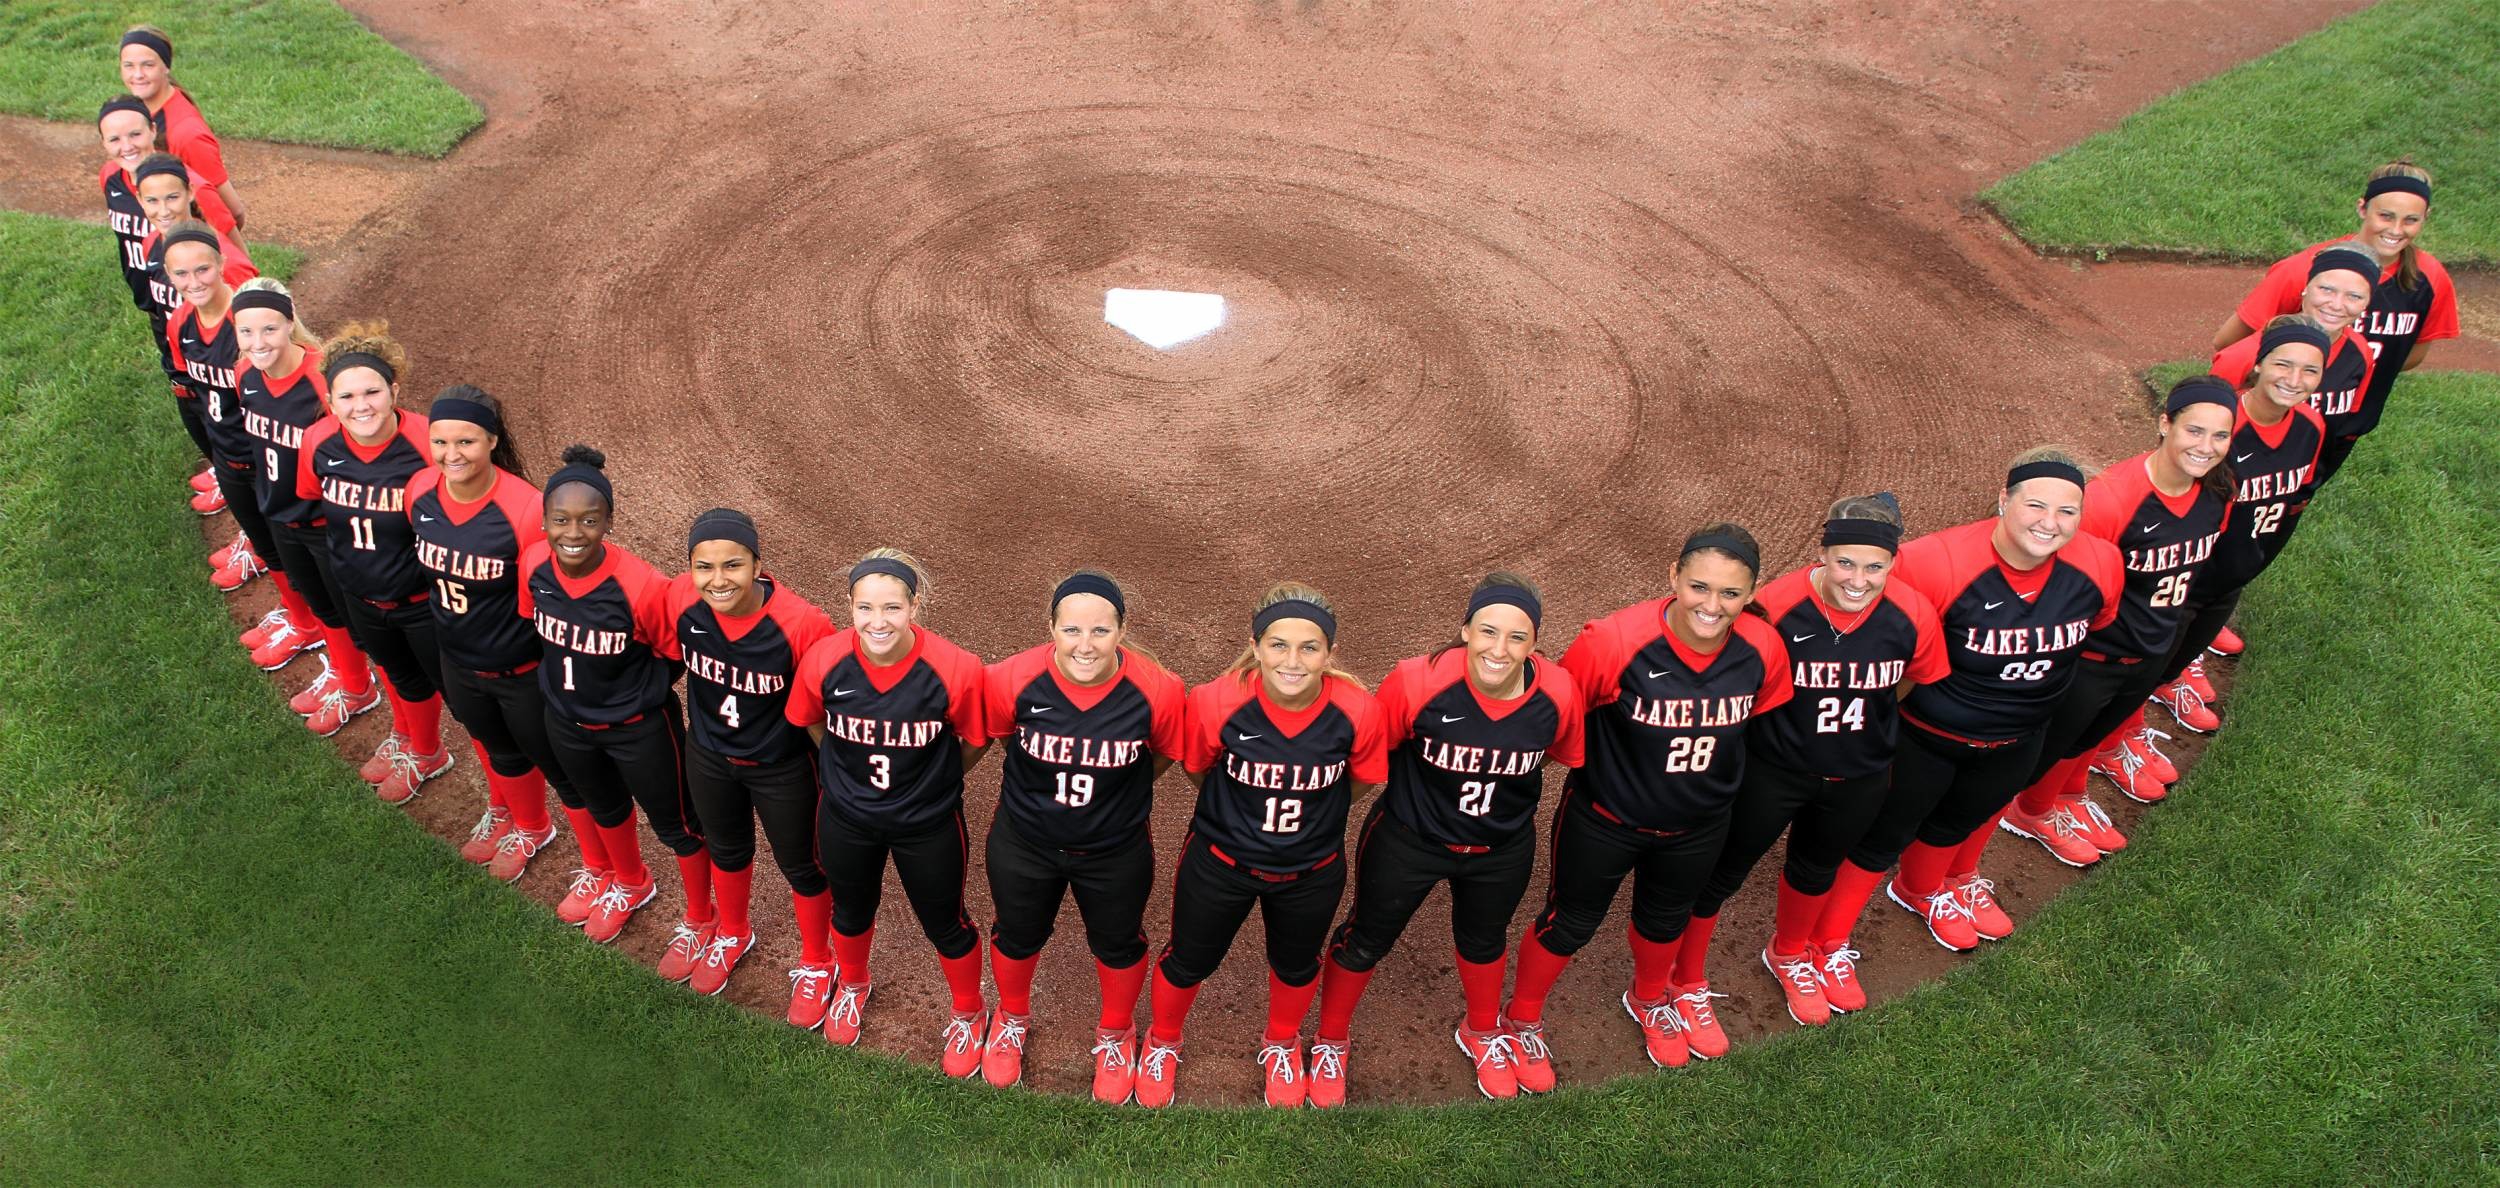 2500x1188 1600x800 Pictures Of A Softball High Quality Backgrounds School Varsity  ...">